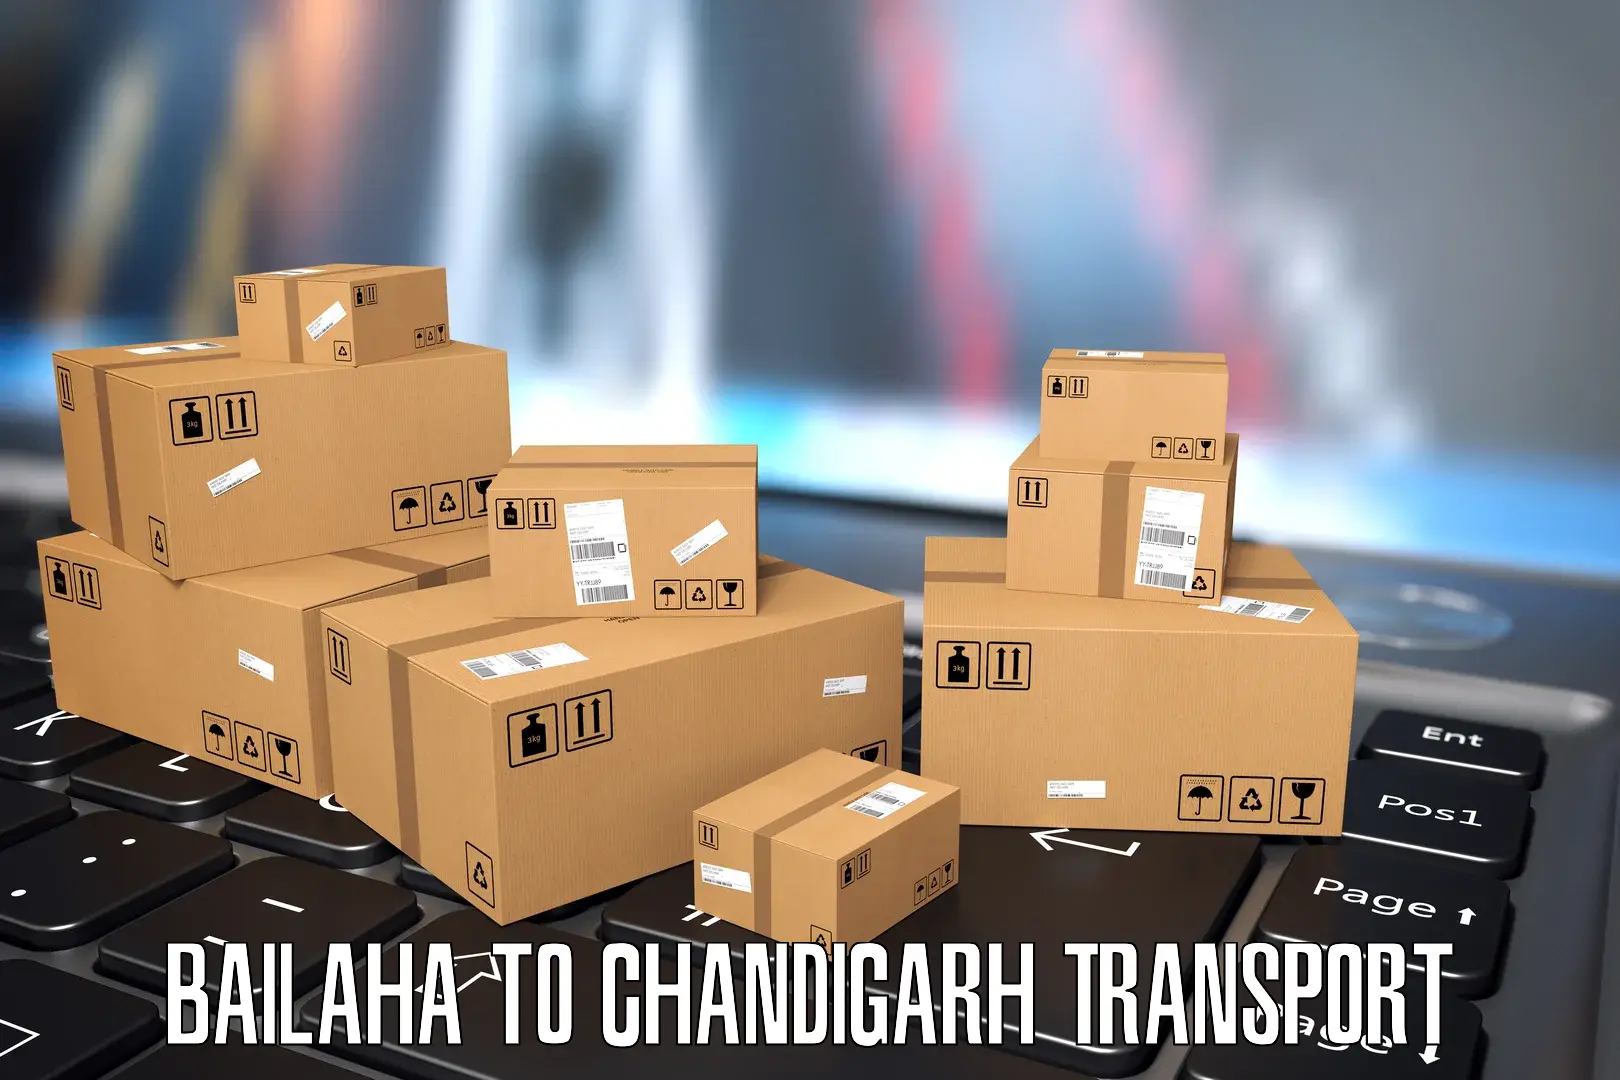 Air freight transport services Bailaha to Chandigarh